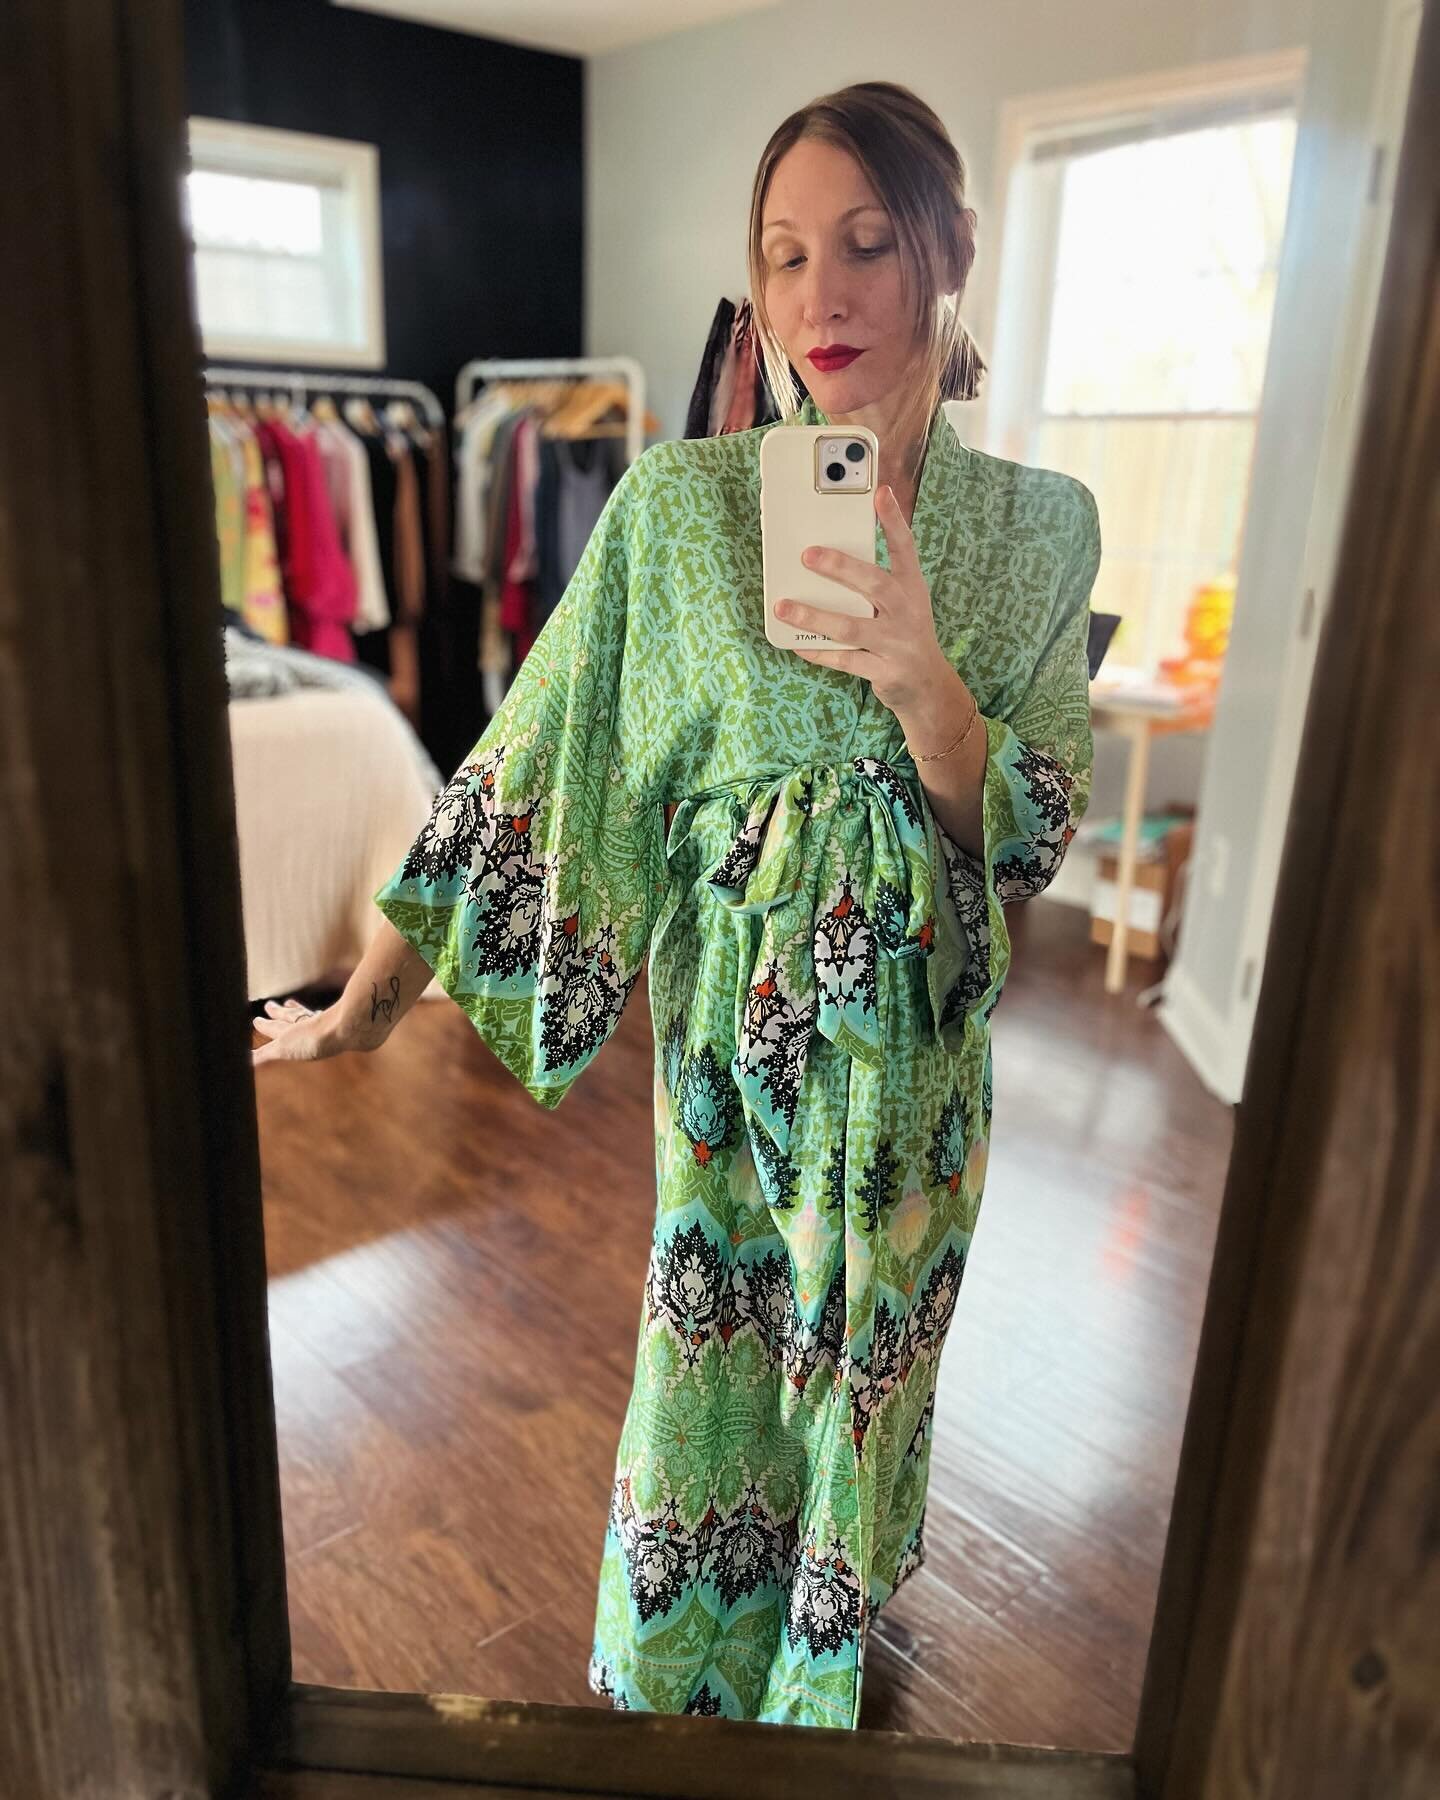 Getting Ready Robes &mdash; the ultimate mindset hack for starting your Monday off right. 

This robe (made of 100% silk so feels like a true dream) is part of VALT&rsquo;s vintage collection. I found this while perusing resort caftans and couldn&rsq